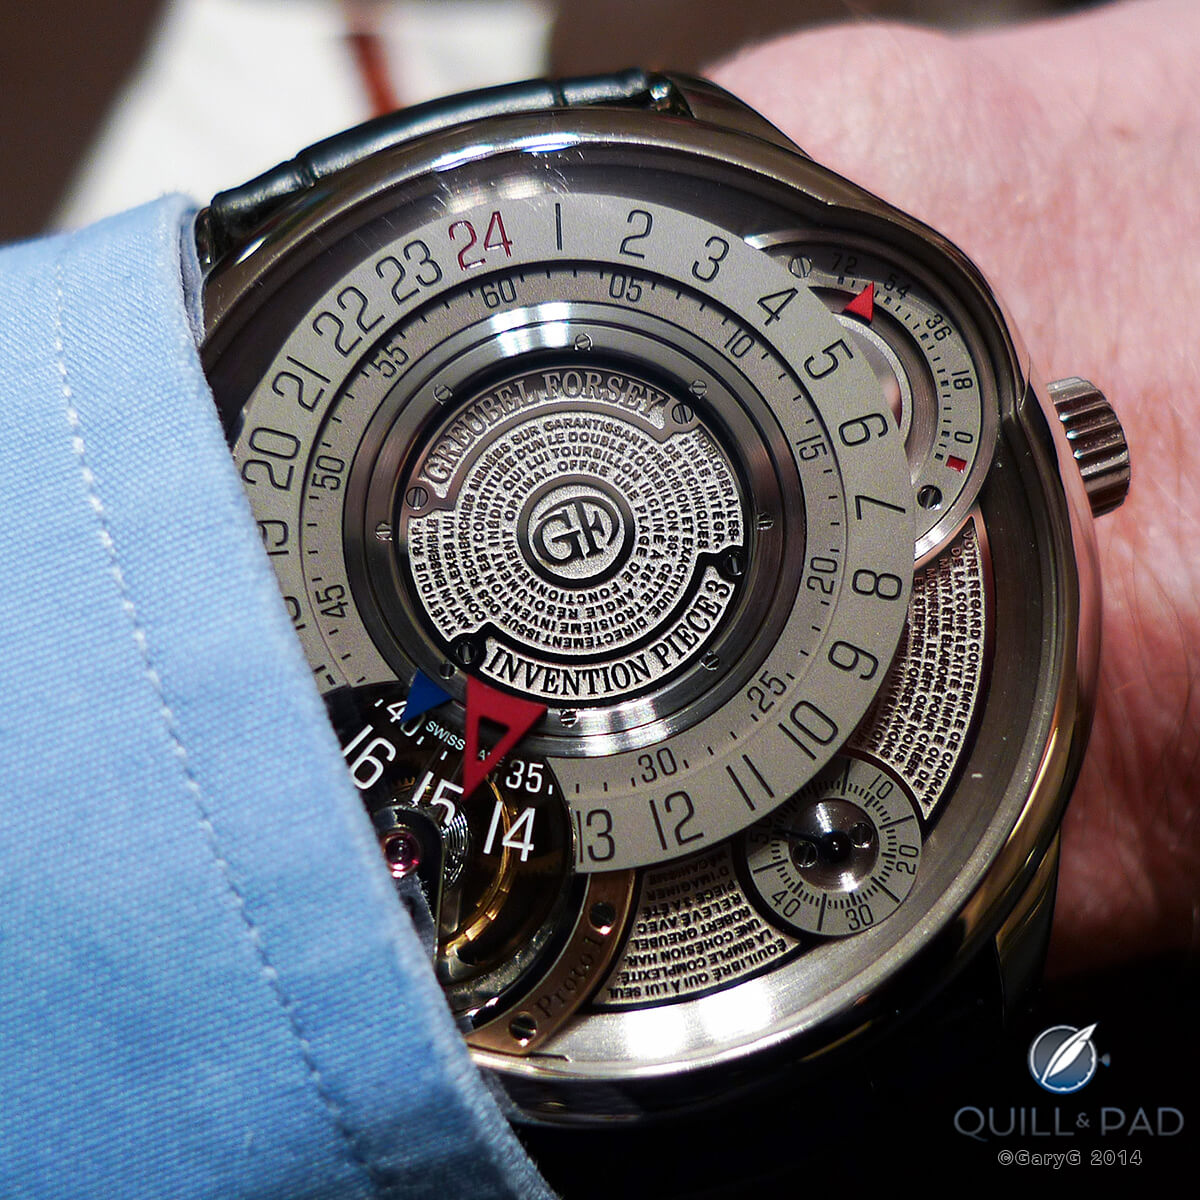 Greubel Forsey Invention Piece 3 with bas relief engraved inscription